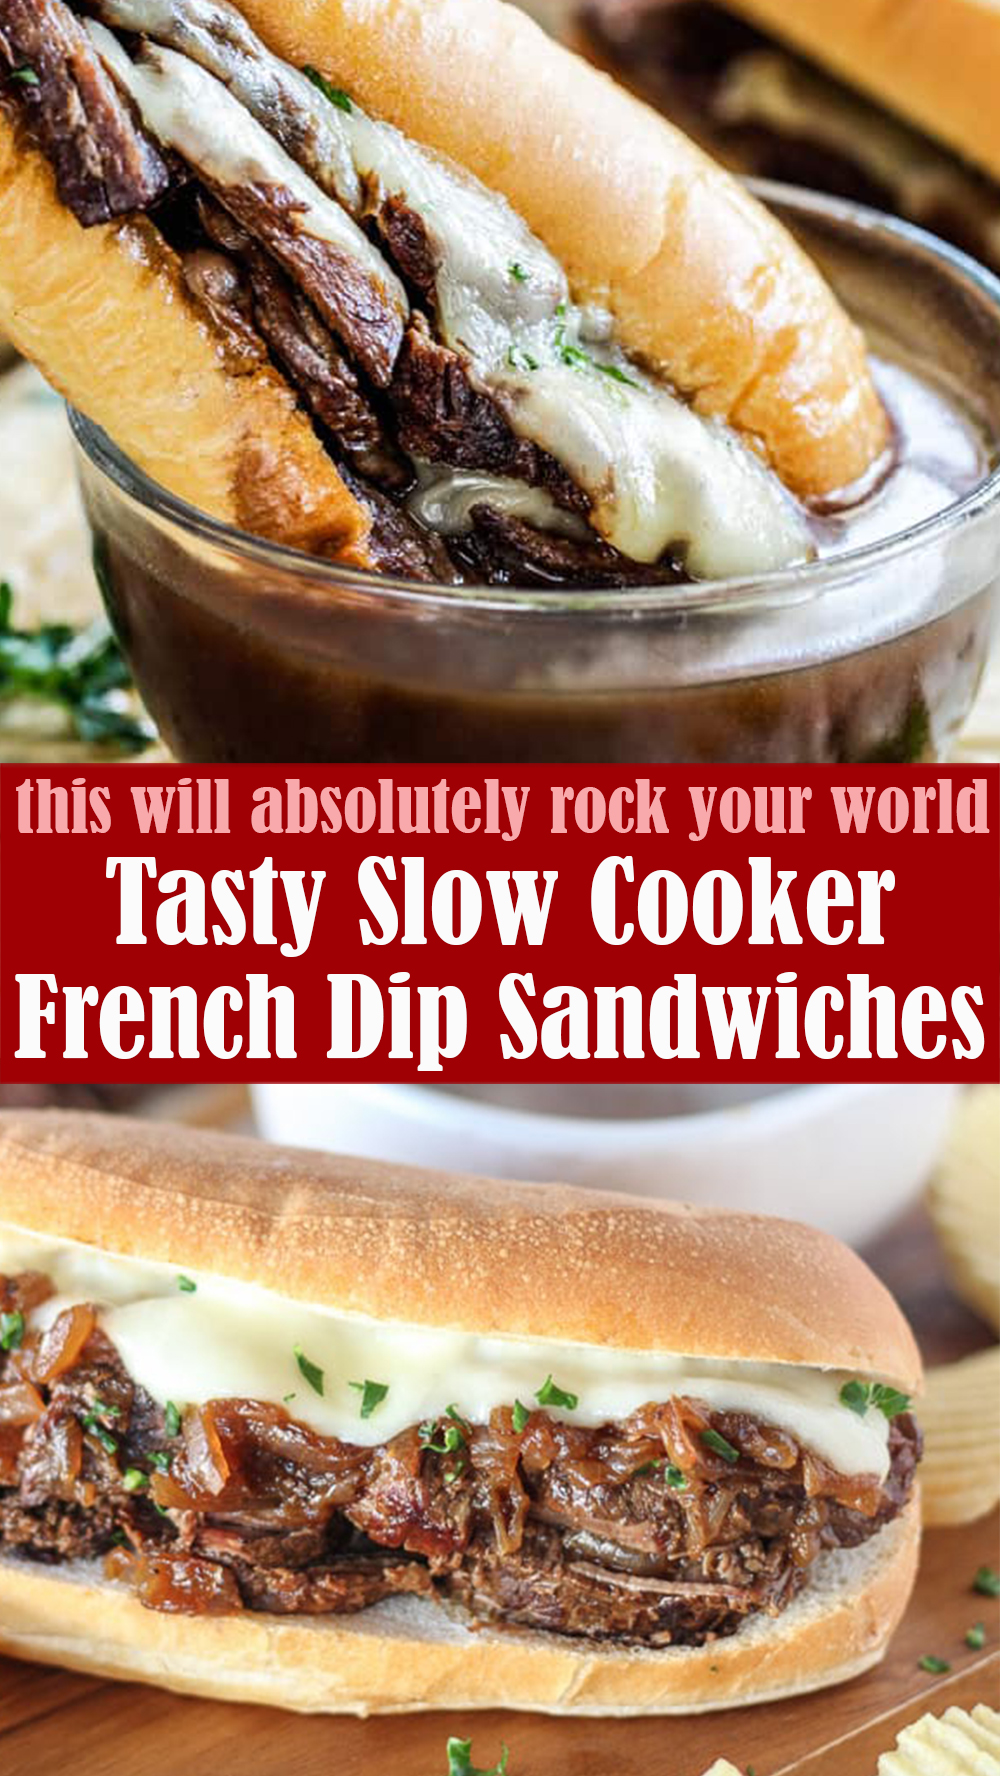 Tasty Slow Cooker French Dip Sandwiches